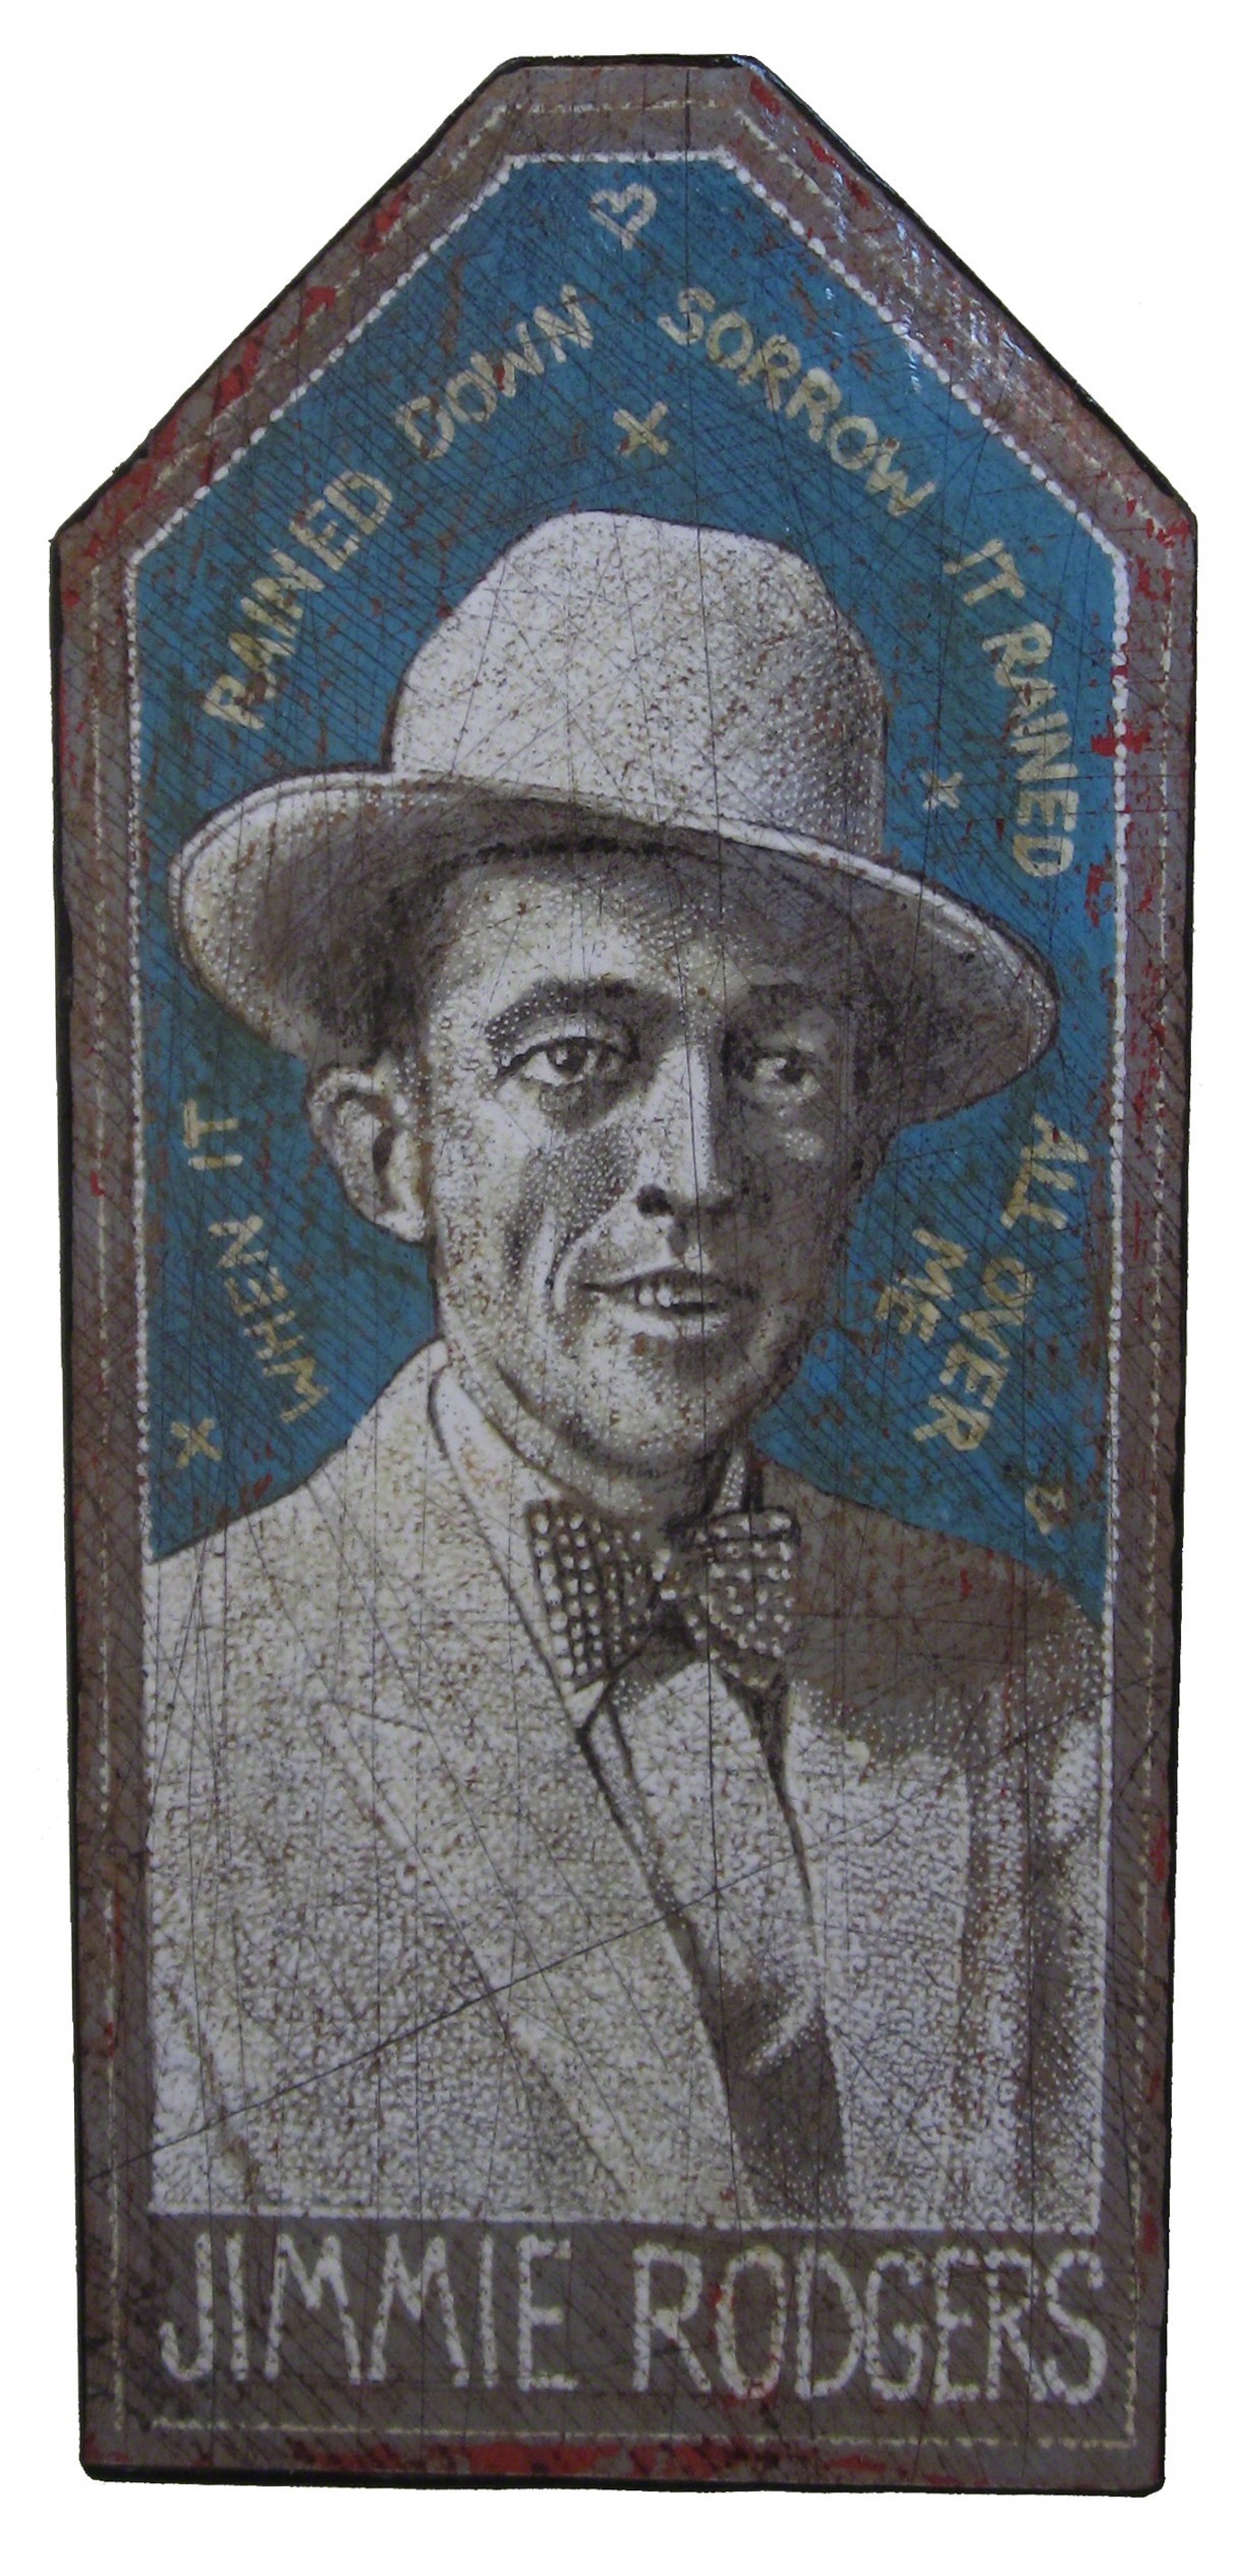 Jimmie Rogers (A.P.) by Jon Langford